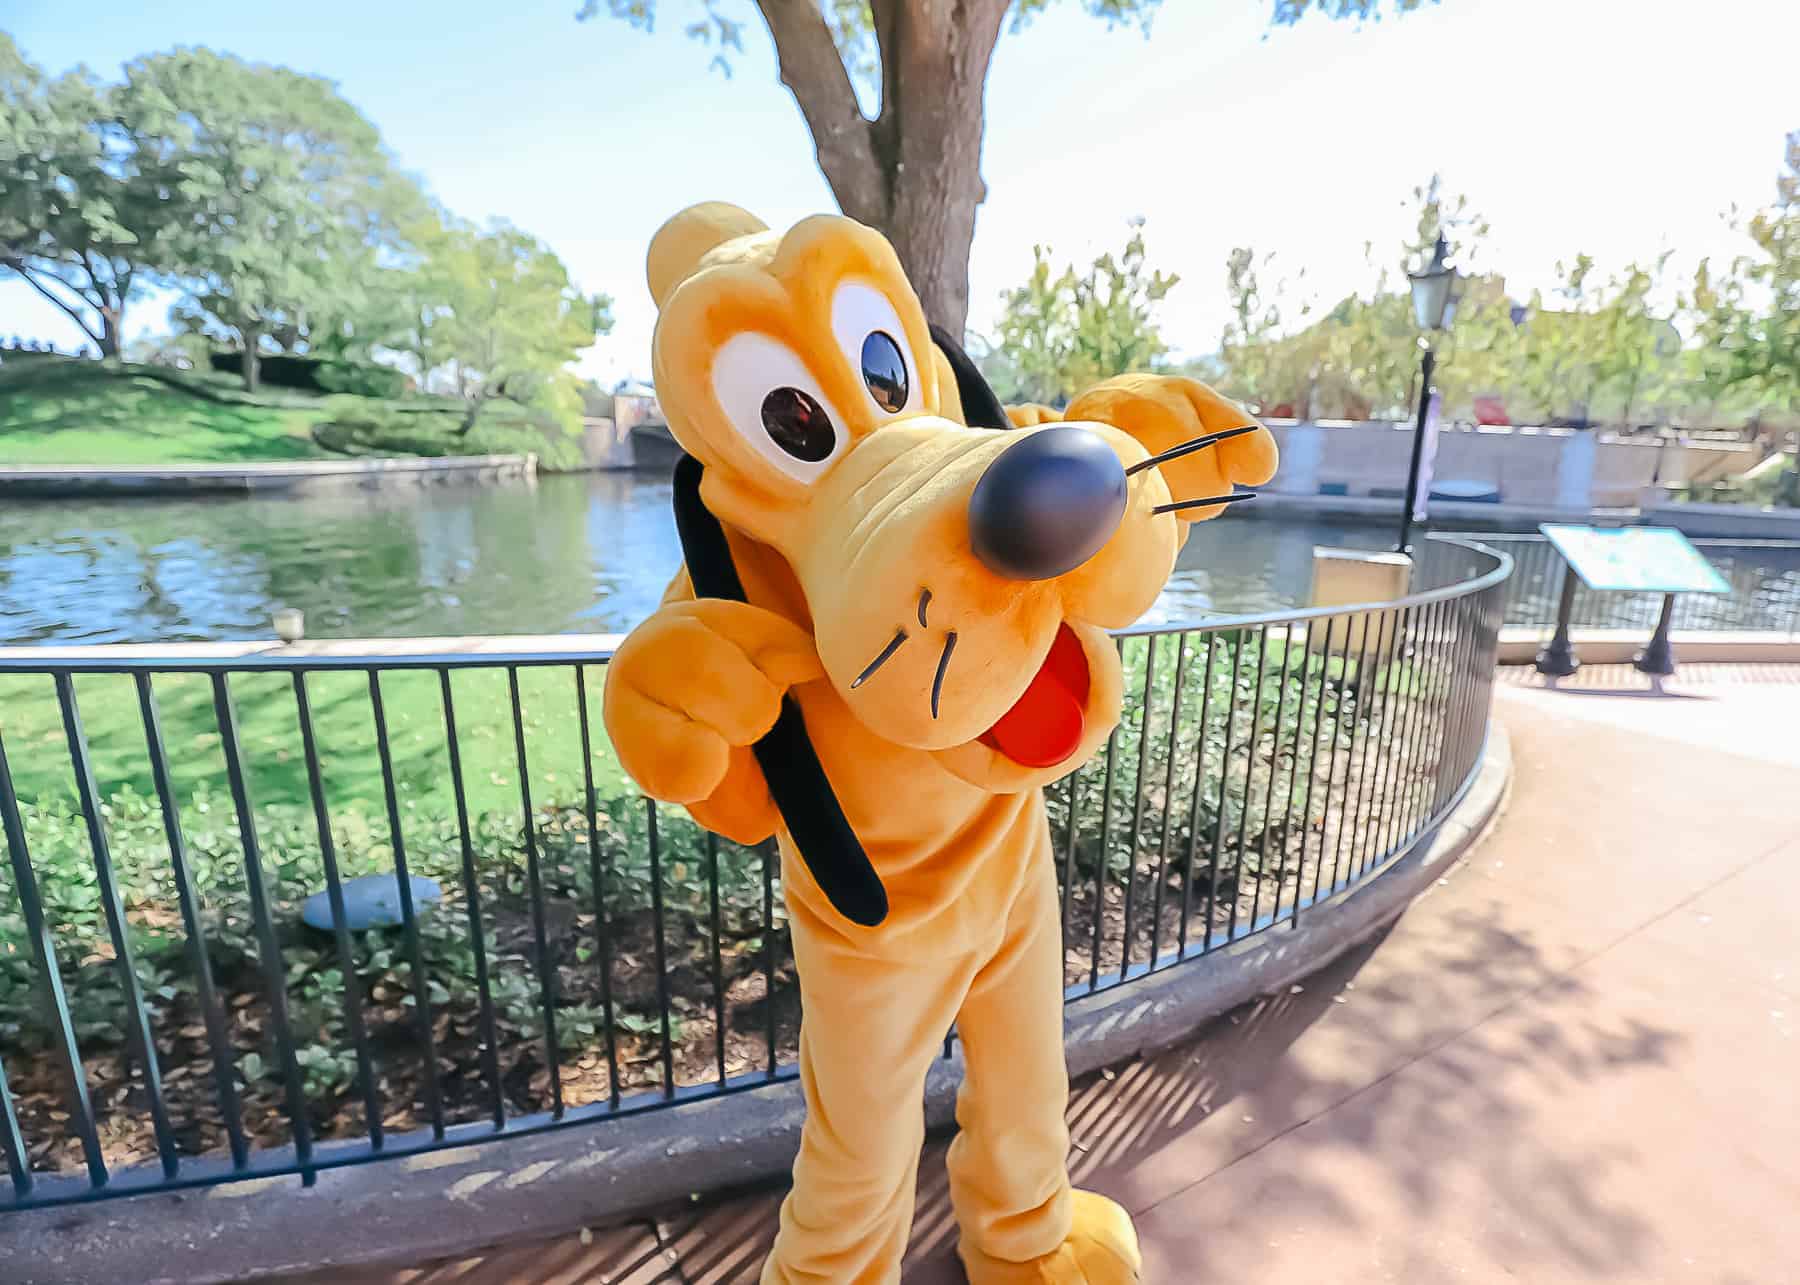 Pluto poses for a photo at Epcot.